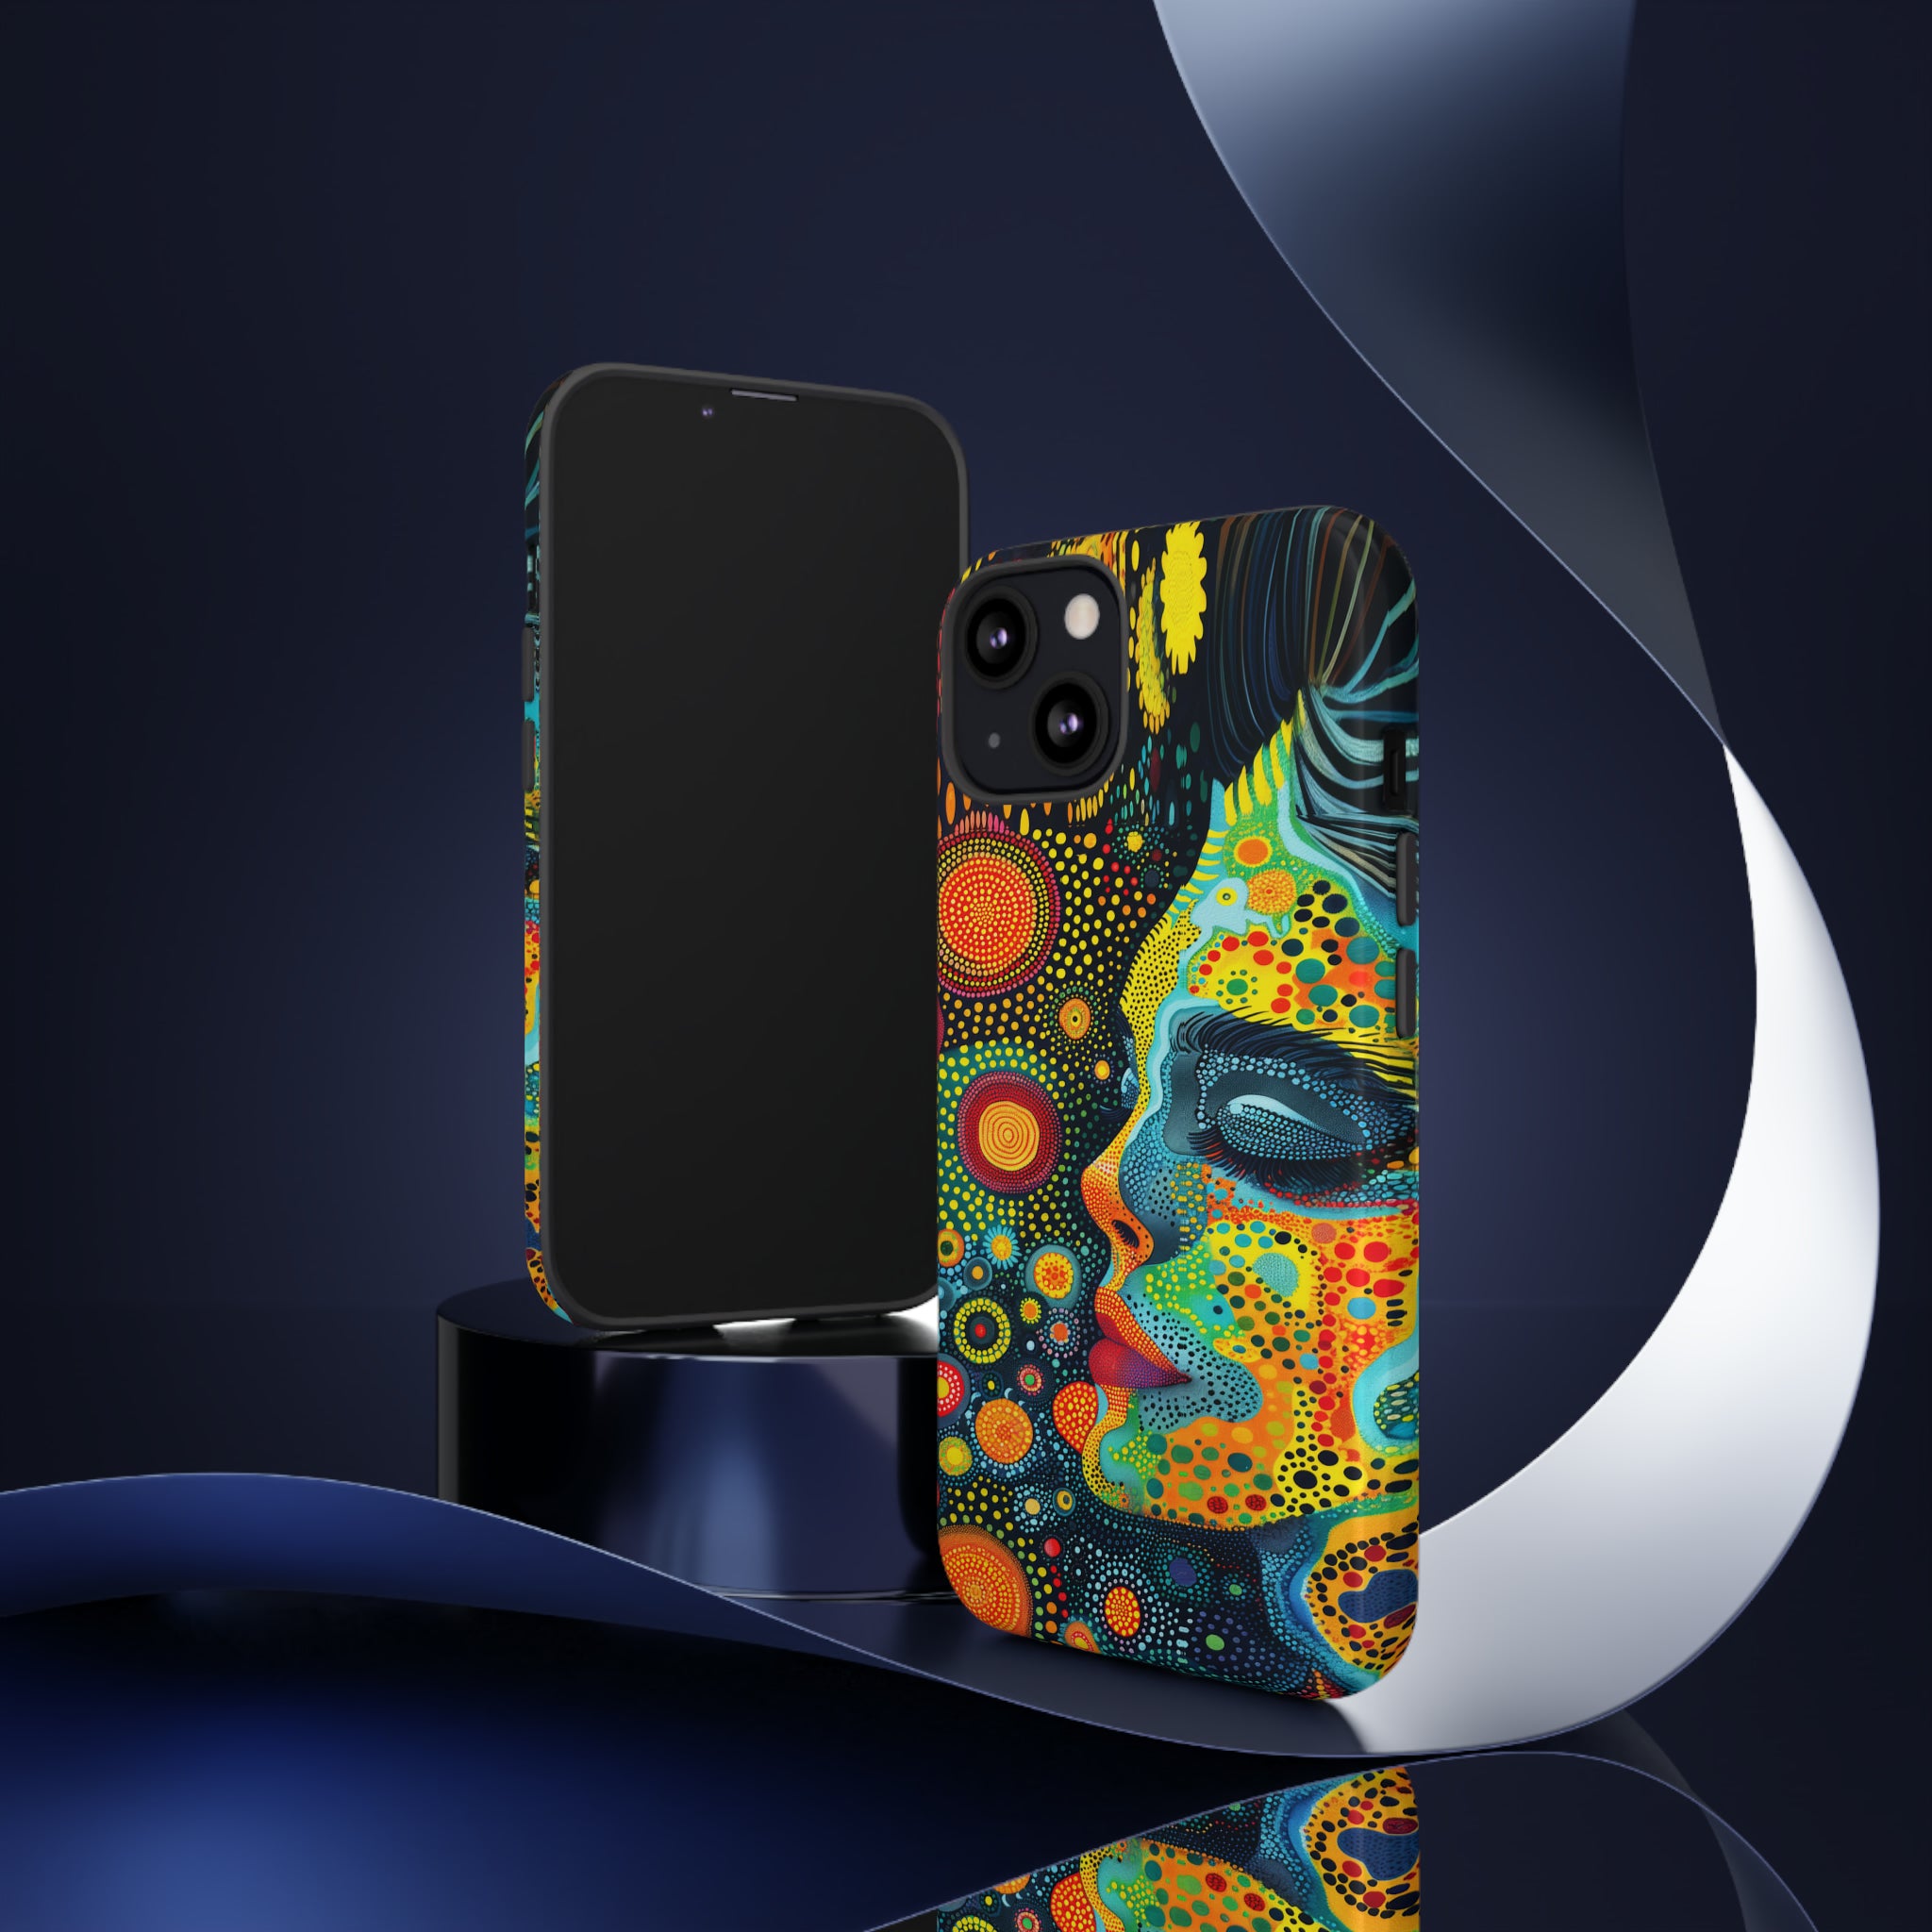 Phone Case, whimsical colorful design, Artistic design, Tough Case, Colorful whimsical fantasy design, iPhone 15, 14, 13, 12, 11, Samsung, Pixel